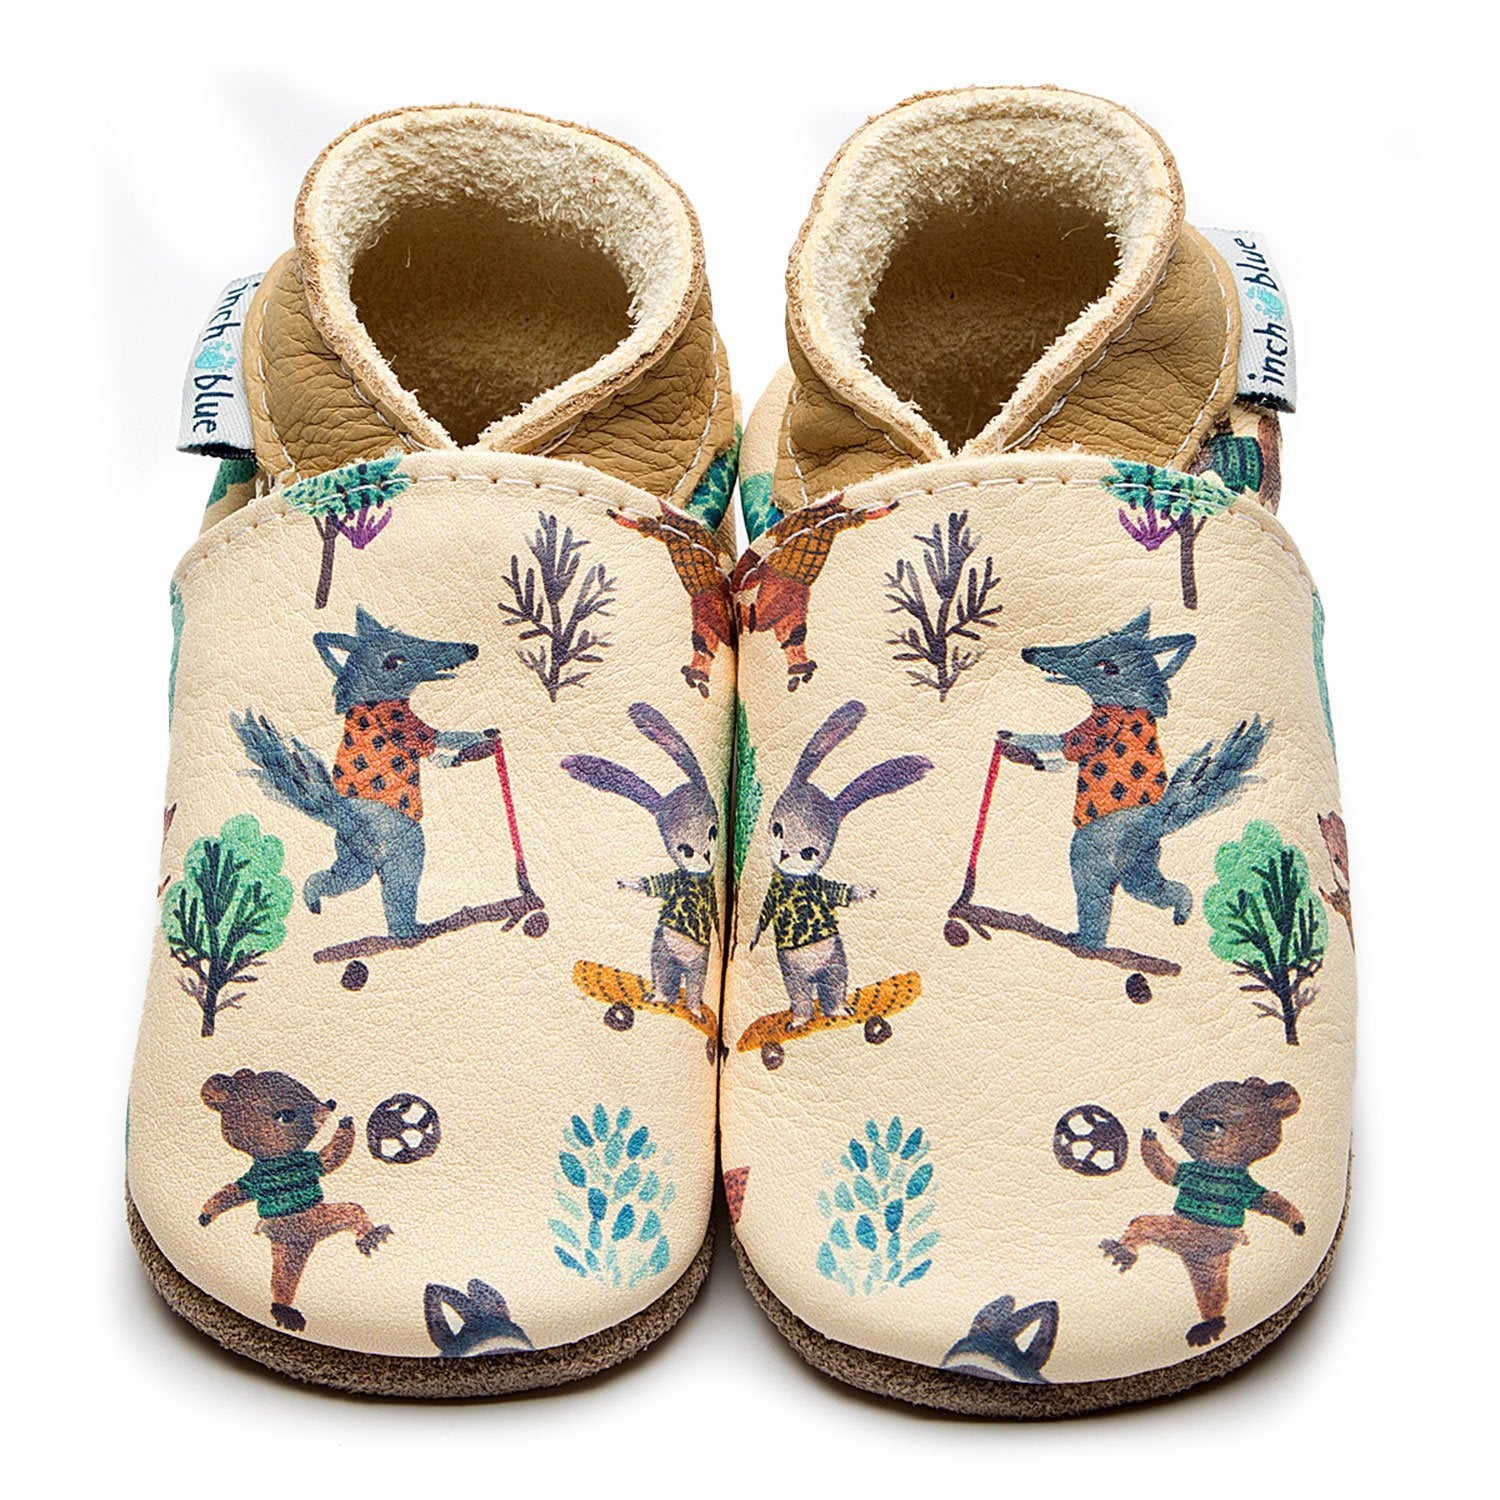 Inch Blue Baby Shoes Forest Fun 3962 Footwear 0-6M / Natural,6-12M / Natural,12-18M / Natural